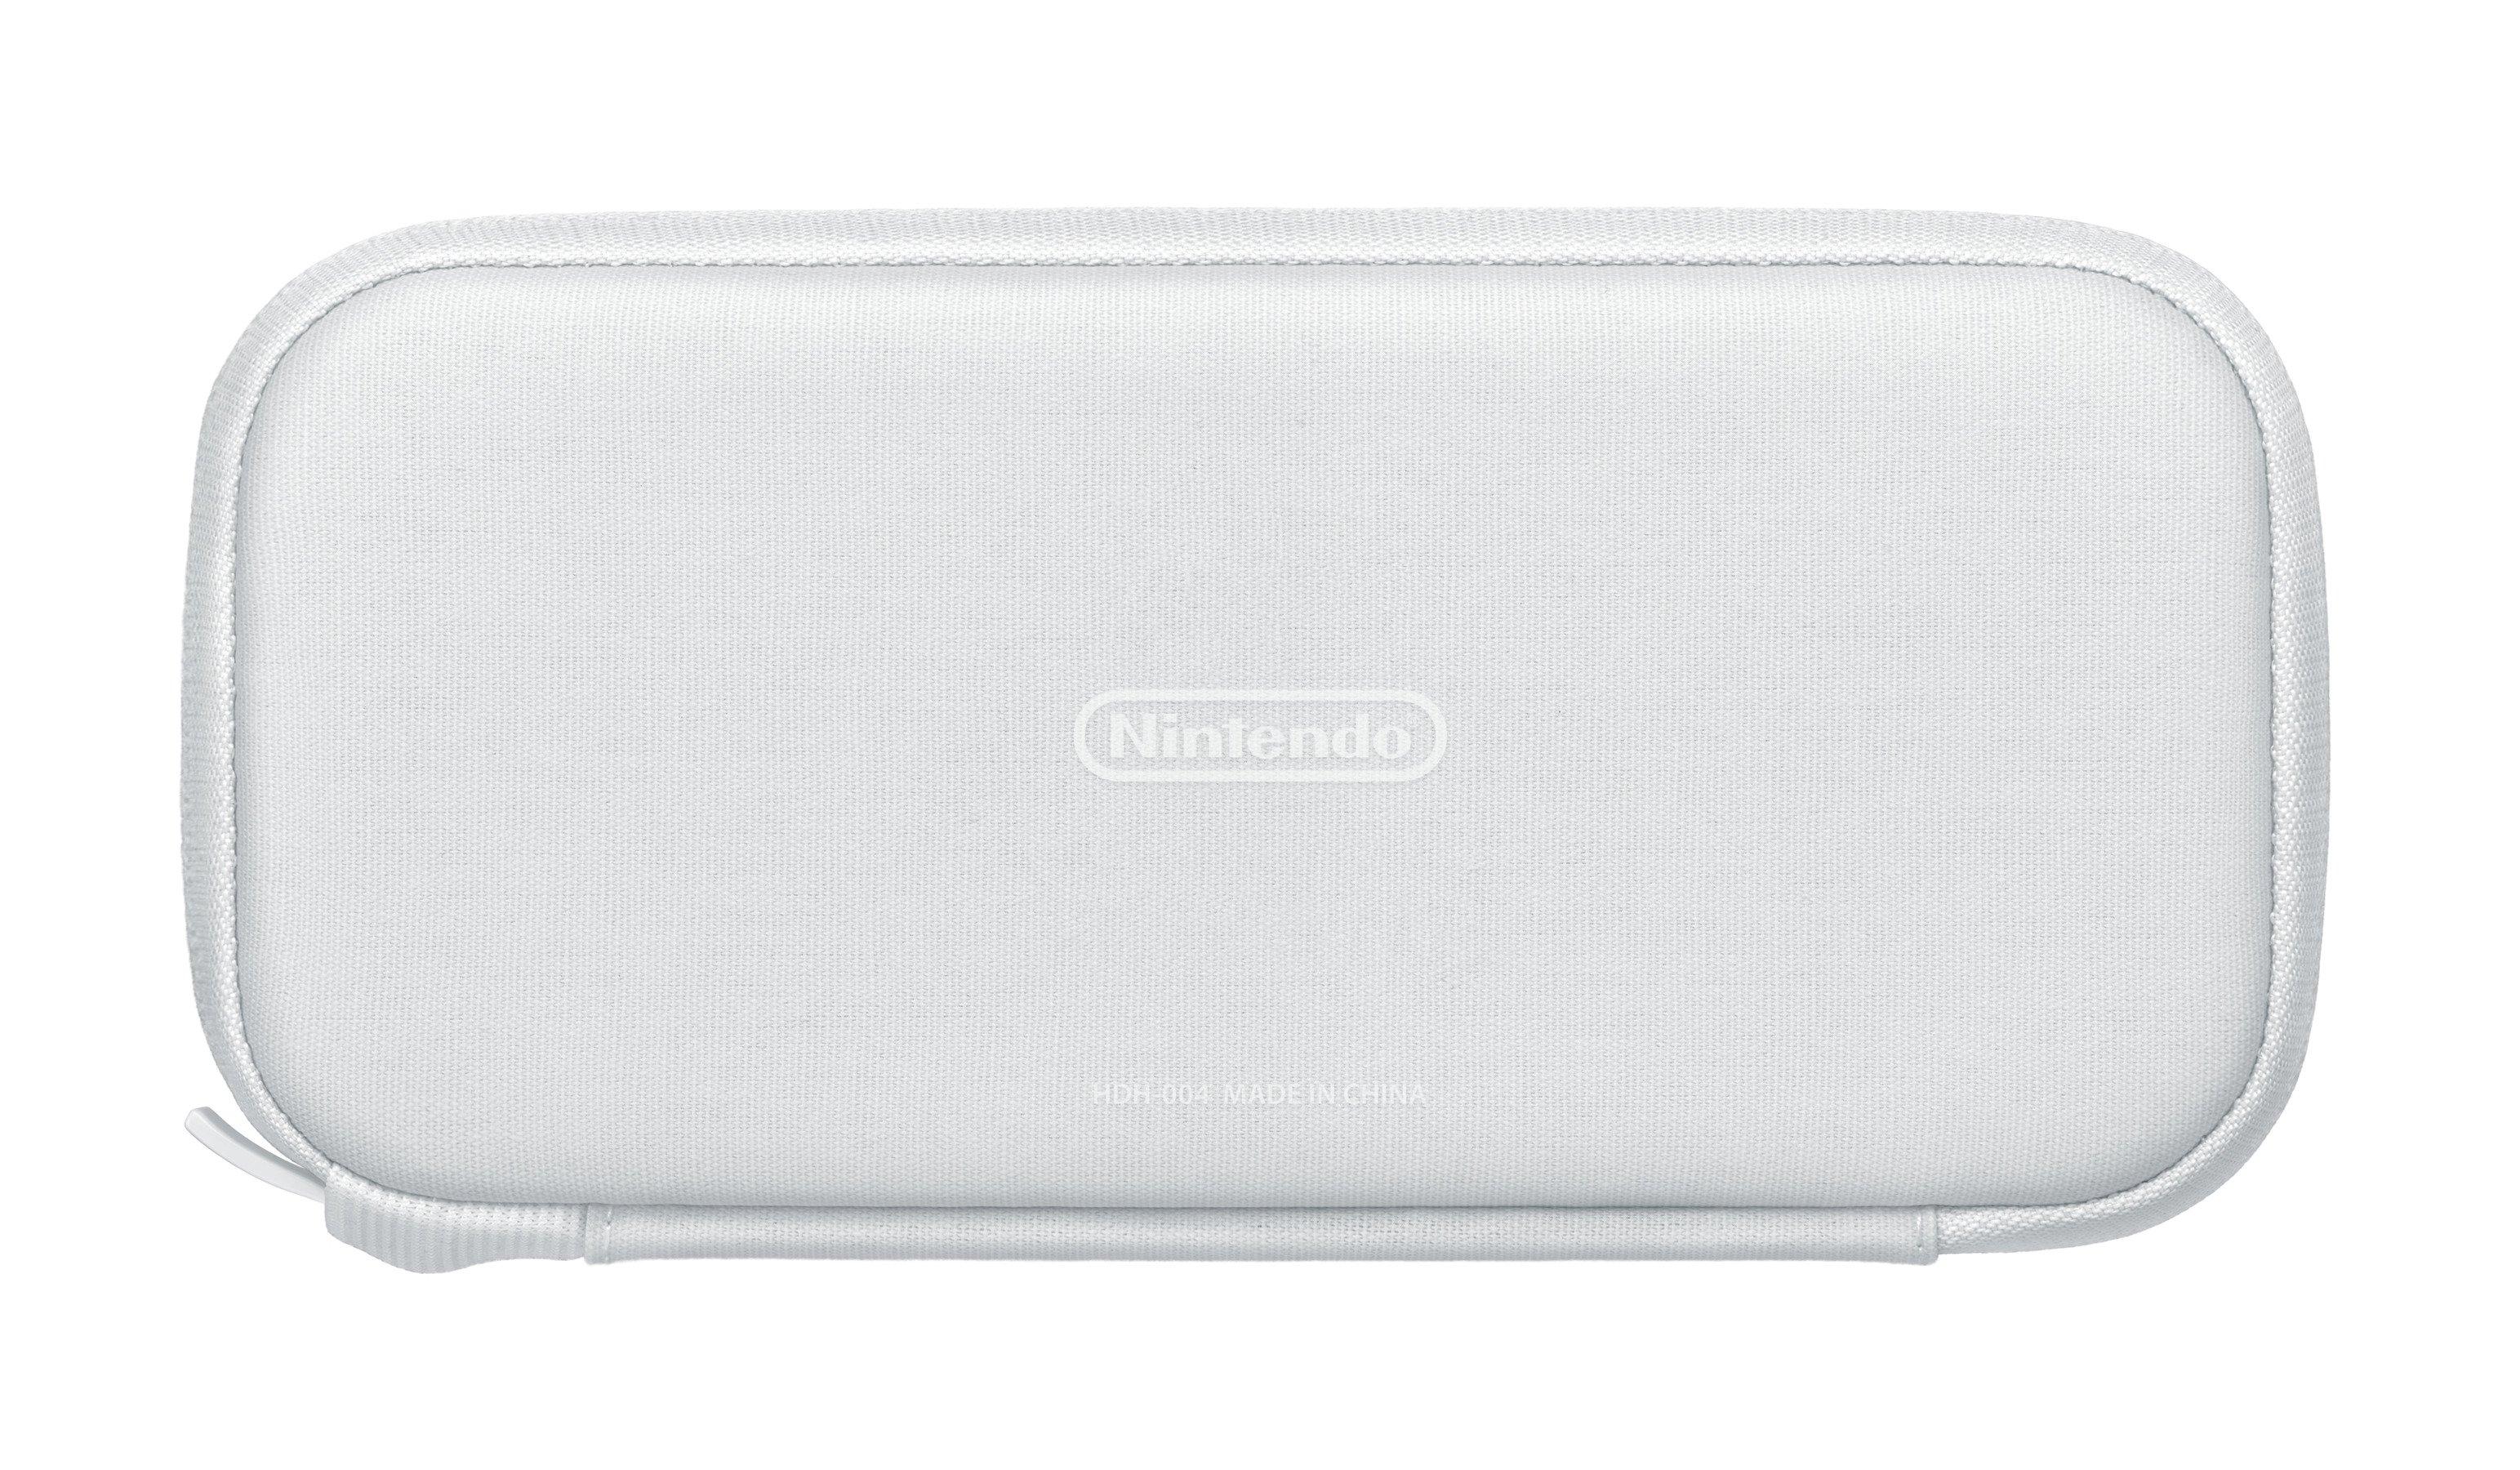 carrying case for nintendo switch lite